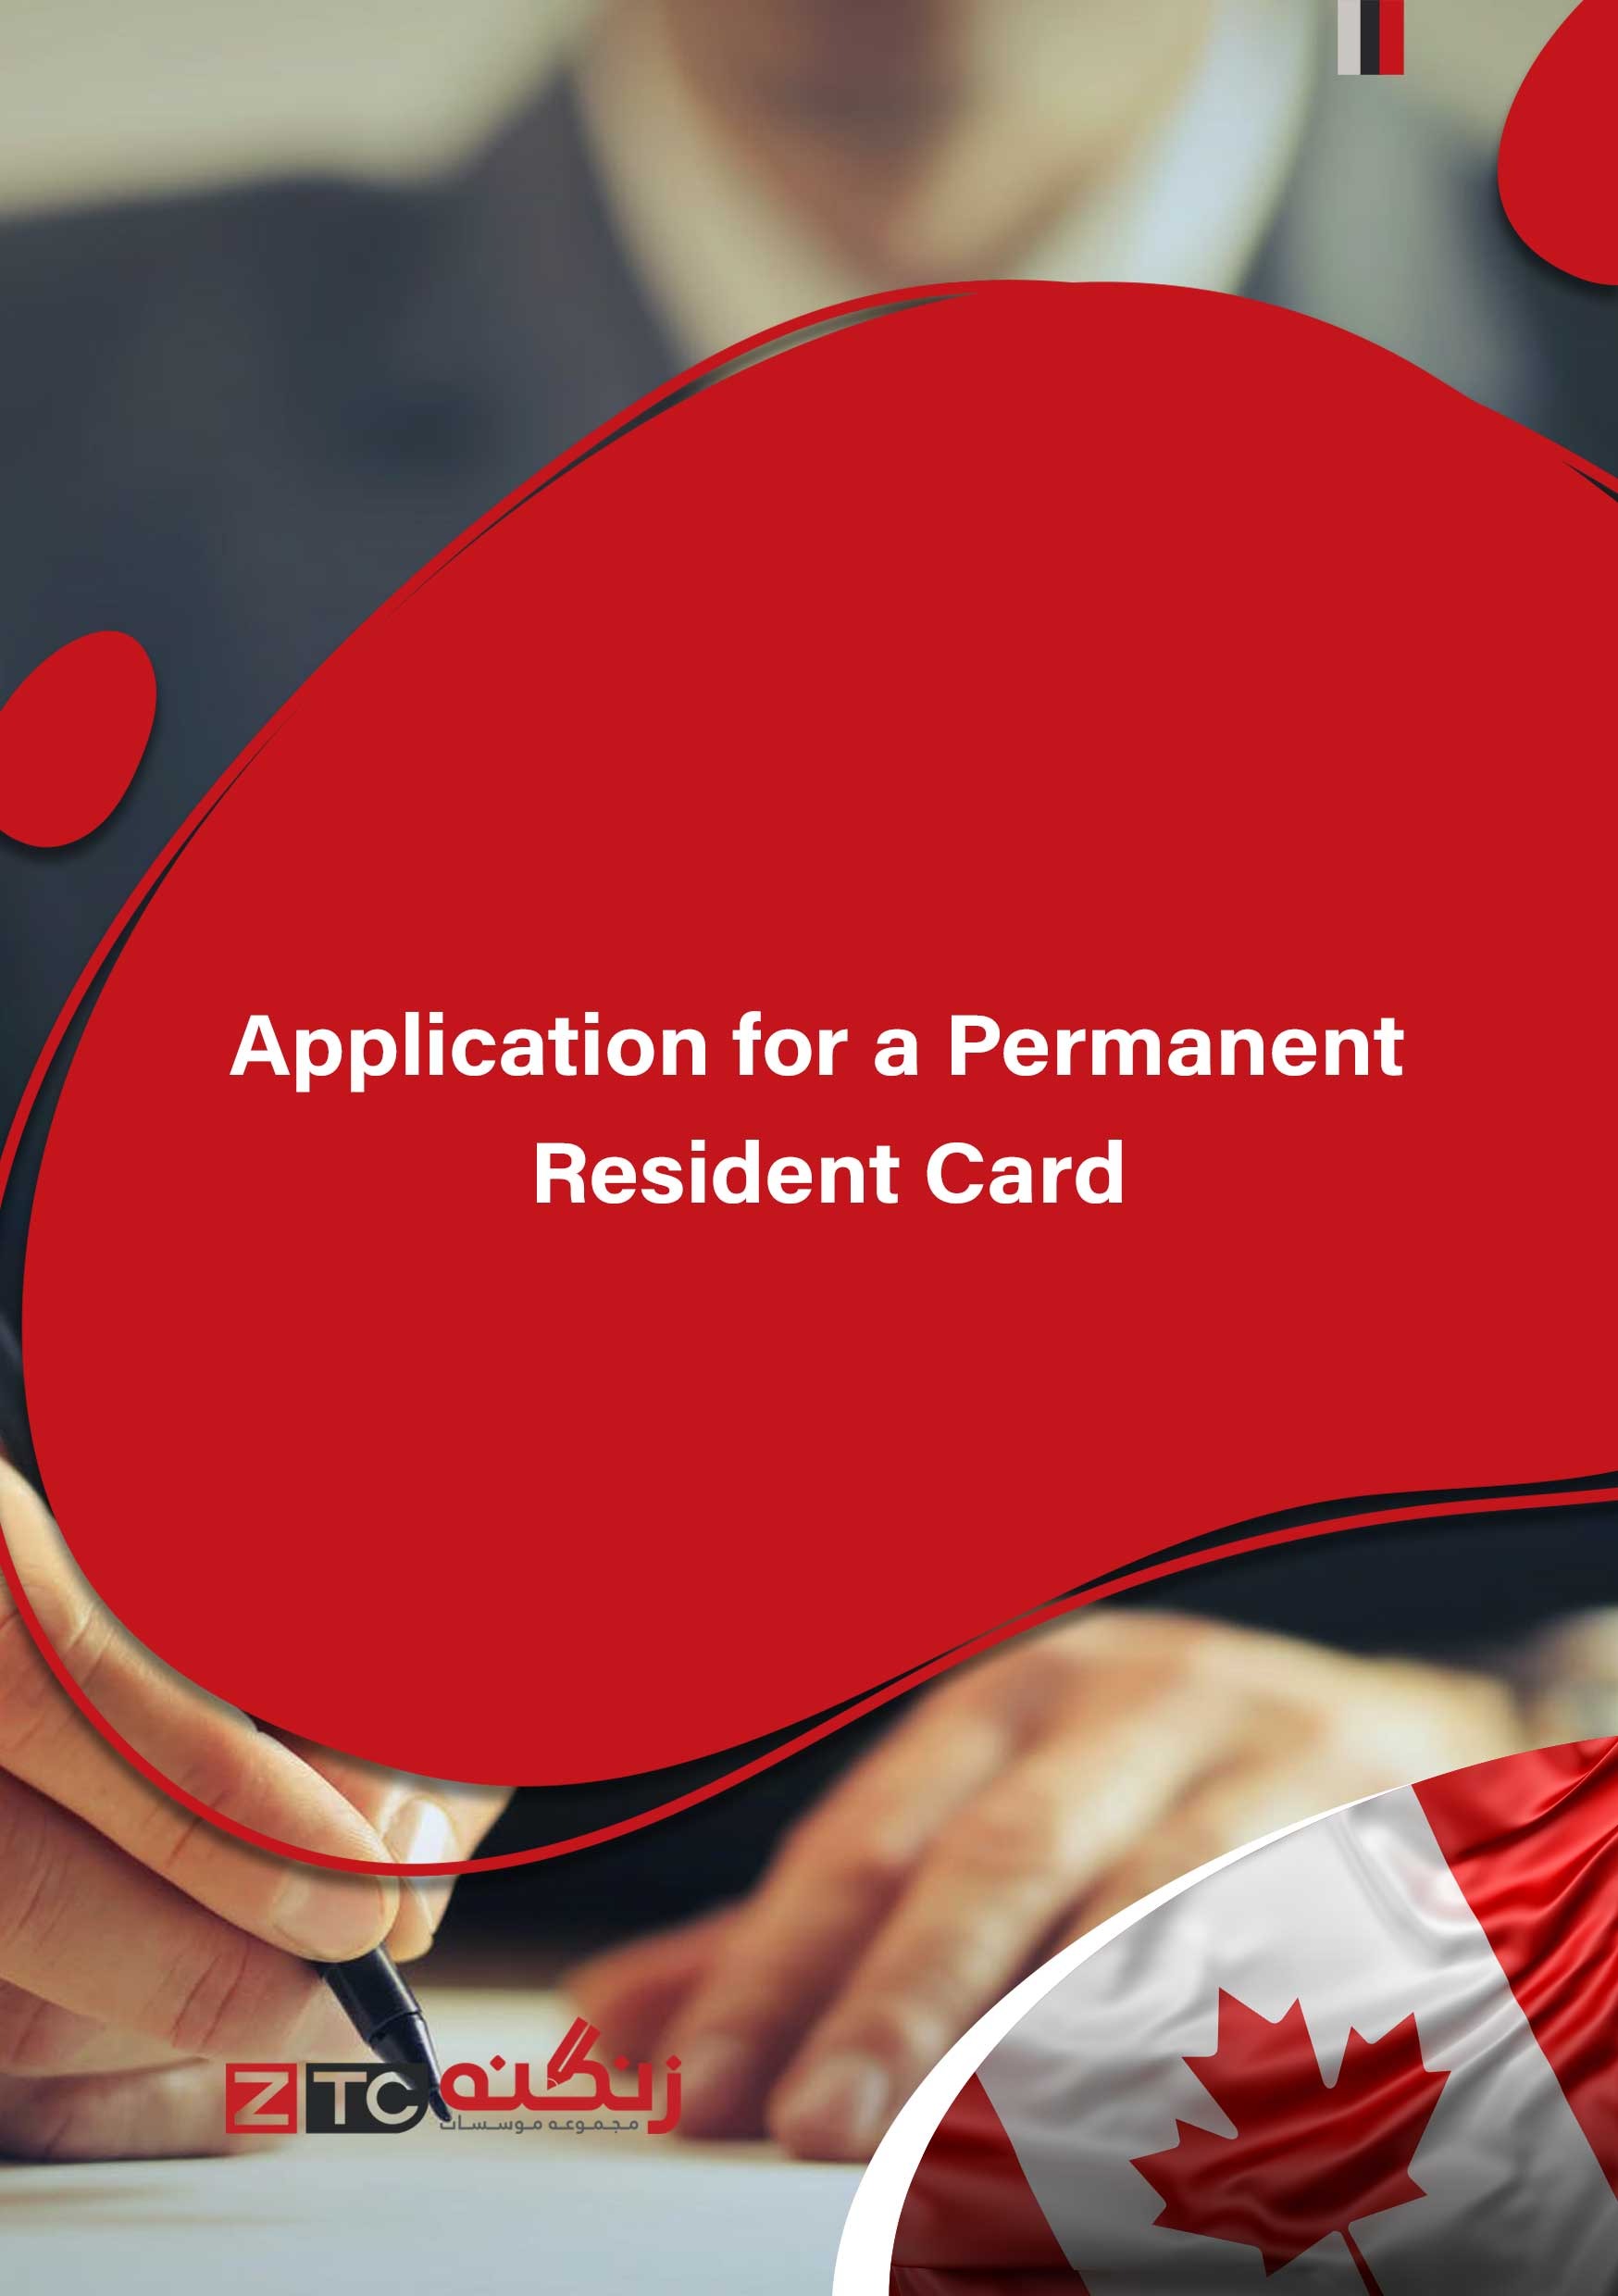 Application for a Permanent Resident Card